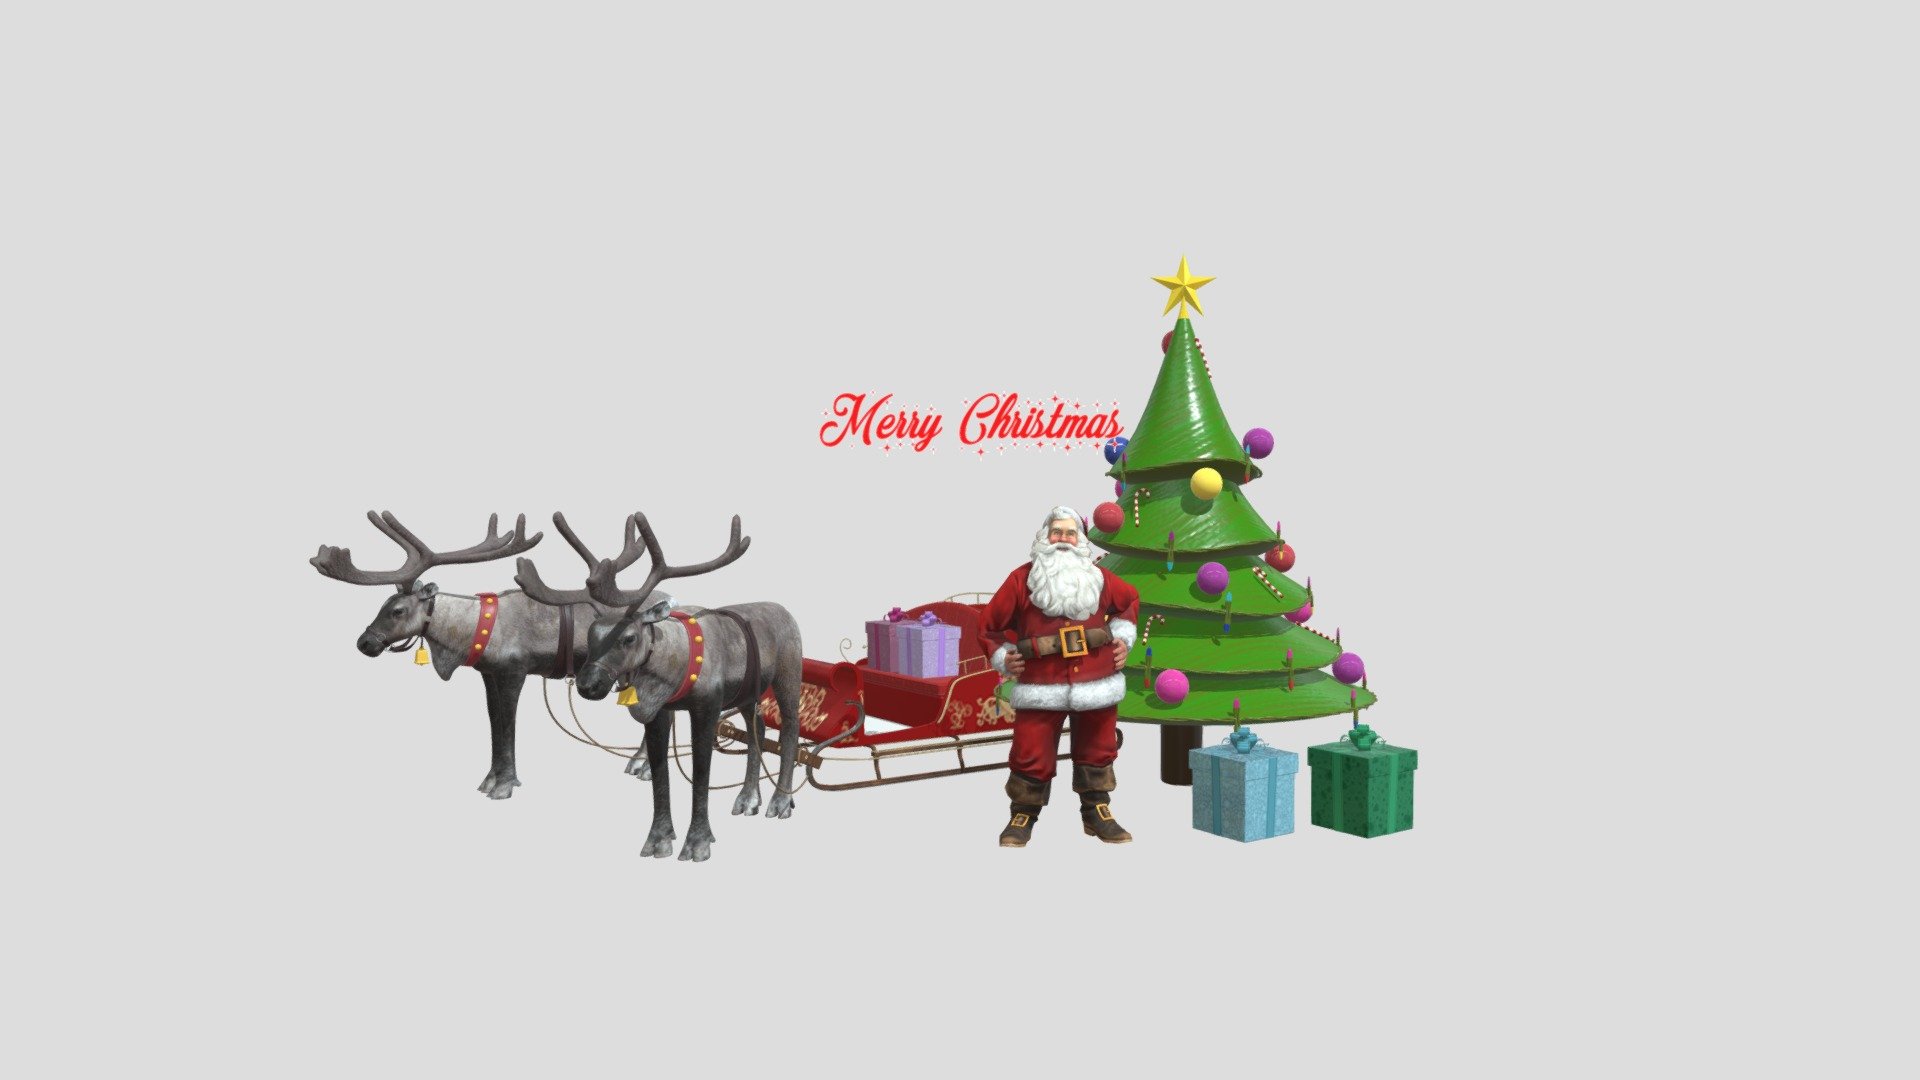 This is Christmas Santa Environment with a charriot and Few Gifts alongside 3d model